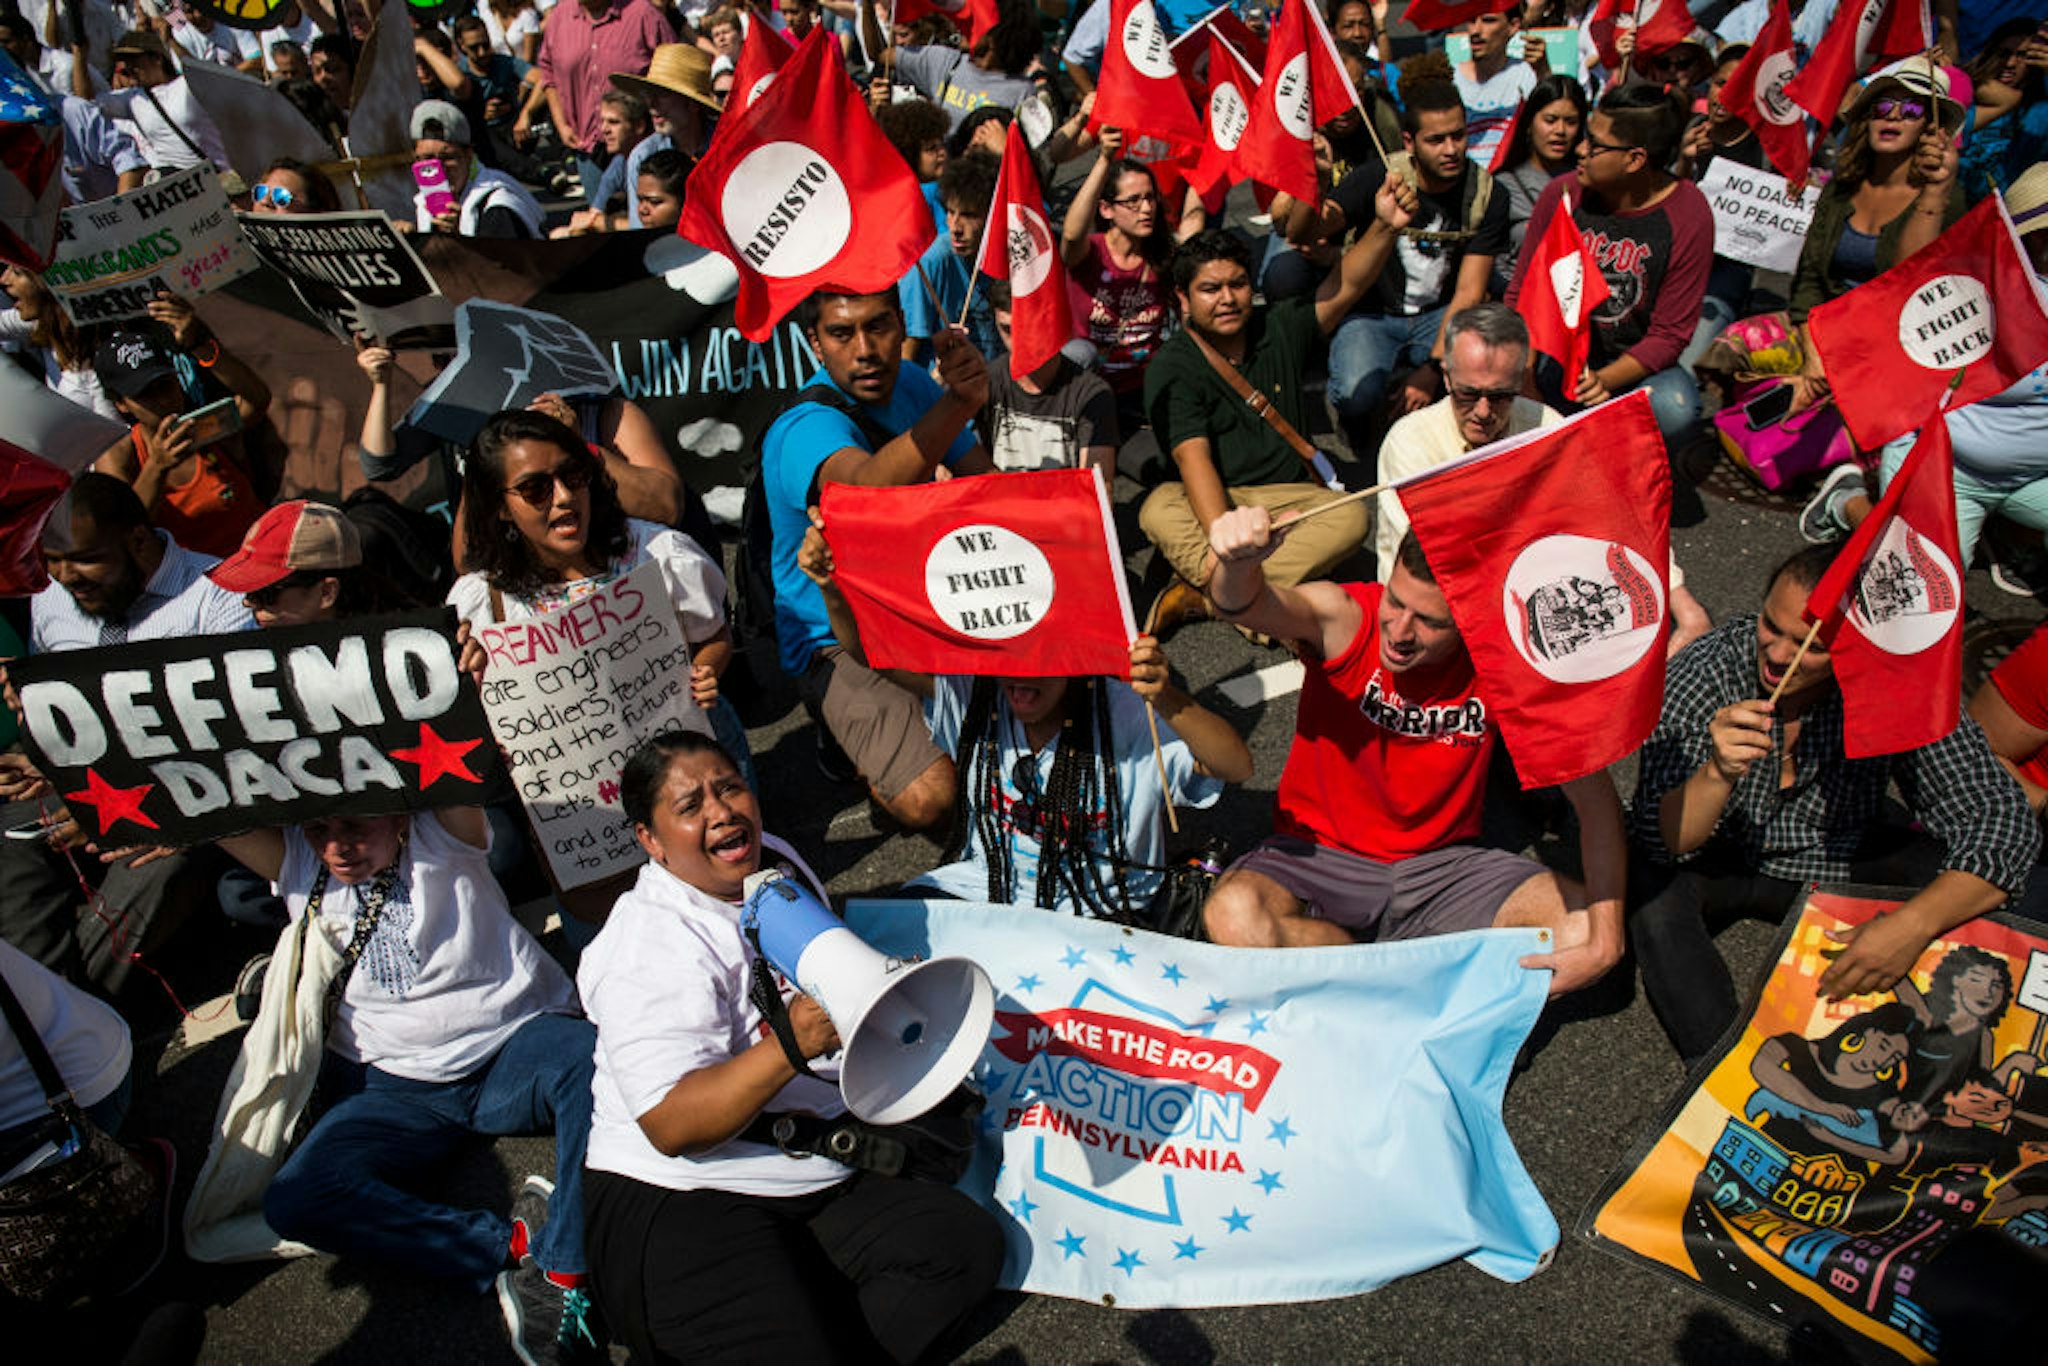 WASHINGTON, DC - SEPTEMBER 5: Demonstrators sit on Pennsylvania Avenue during a demonstration in response to the Trump Administration's announcement that it would end the Deferred Action for Childhood Arrivals (DACA) program on September 5, 2017 in Washington, DC. DACA, an immigration policy passed by former President Barack Obama, allows certain undocumented immigrants who arrived in the United States as minors to receive renewable two-year deferred action from deportation and eligibility fork a work permit.